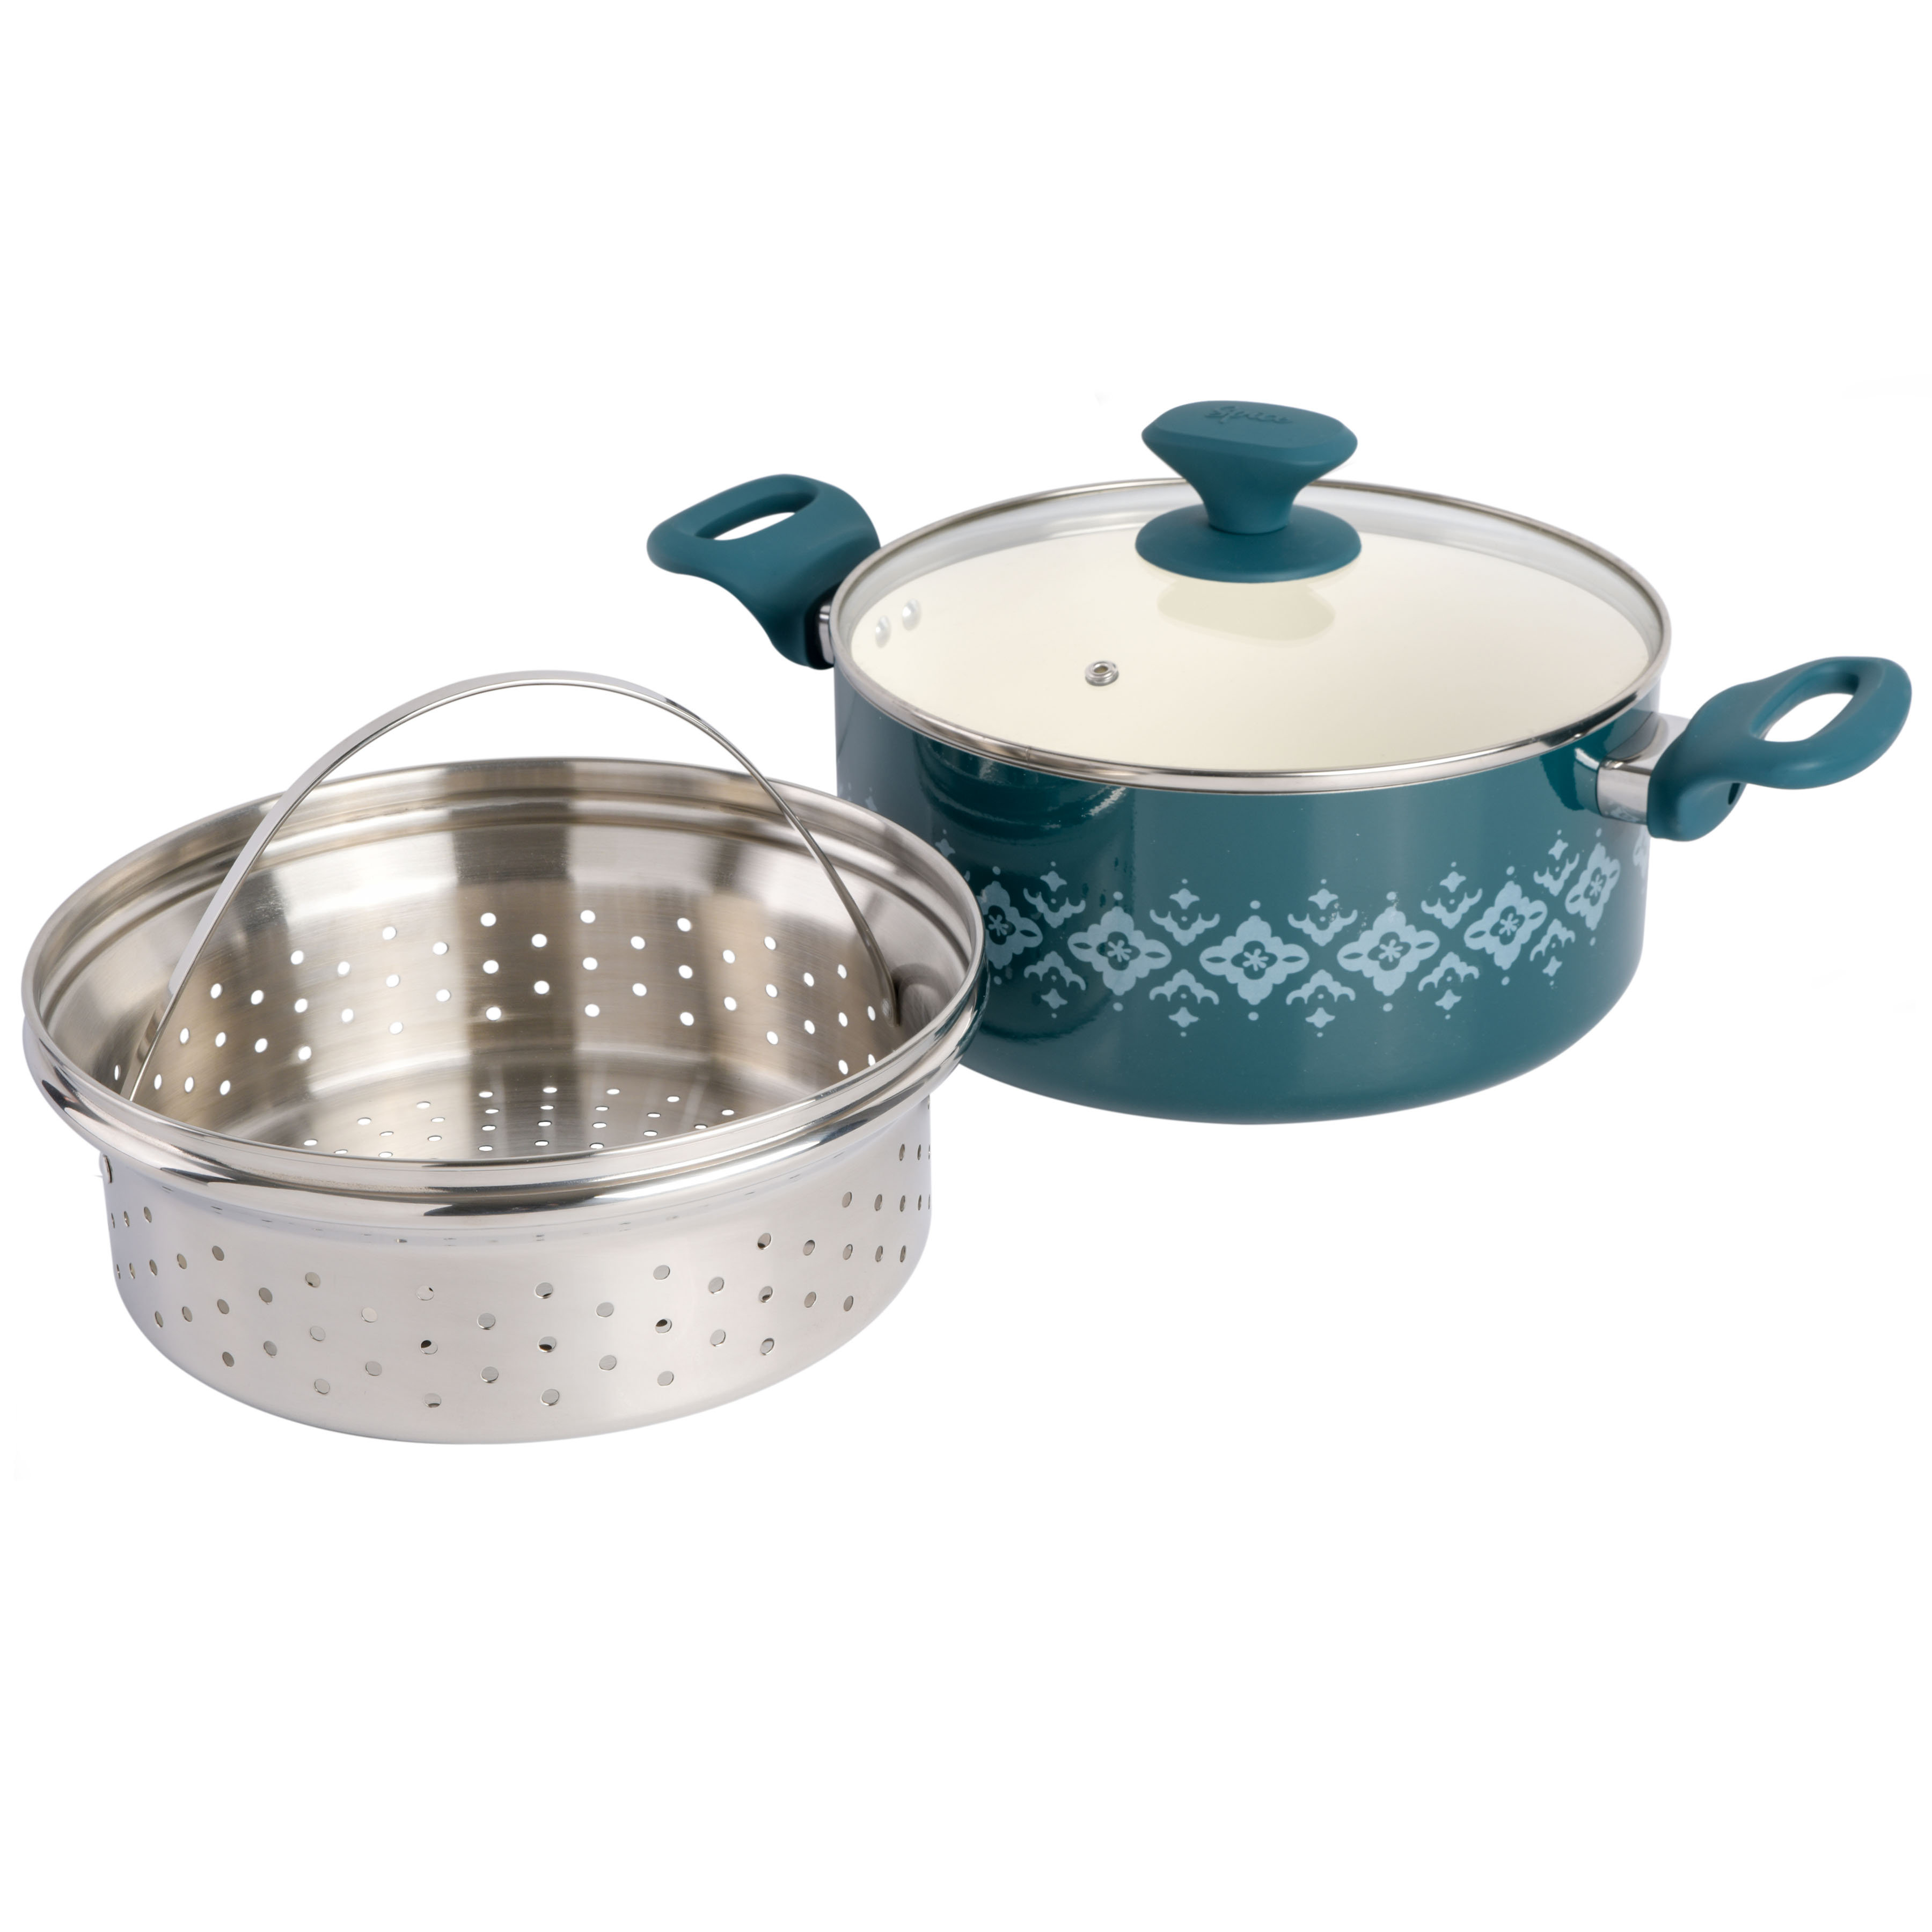 Spice By Tia Mowry Cooking Cookware & Bakeware, Kitchen & Dining